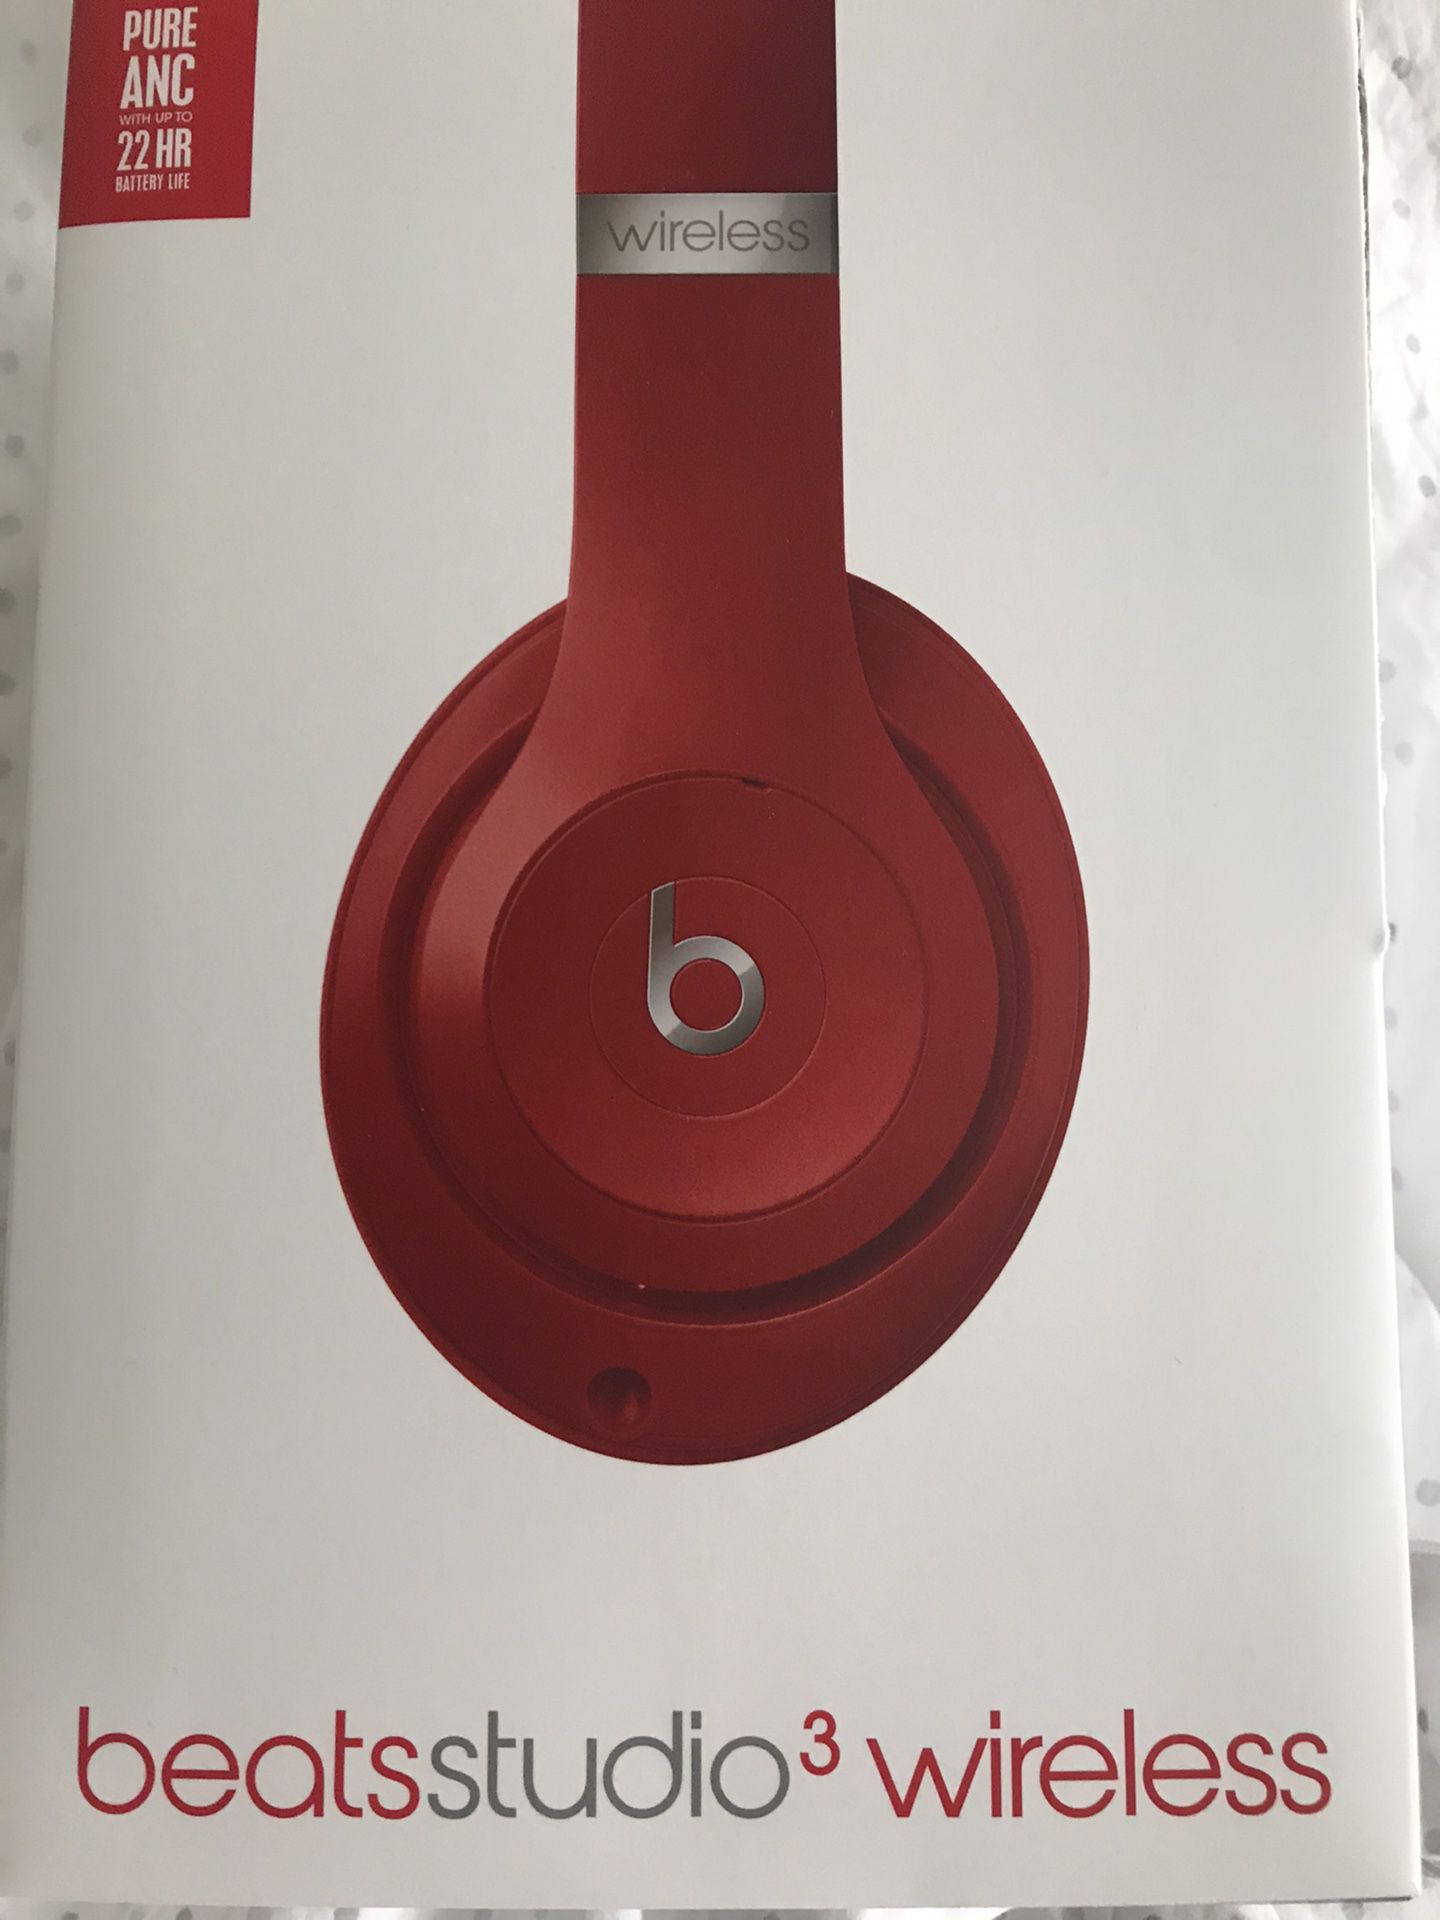 NEW in box. Beats studio 3 wireless . Color red.